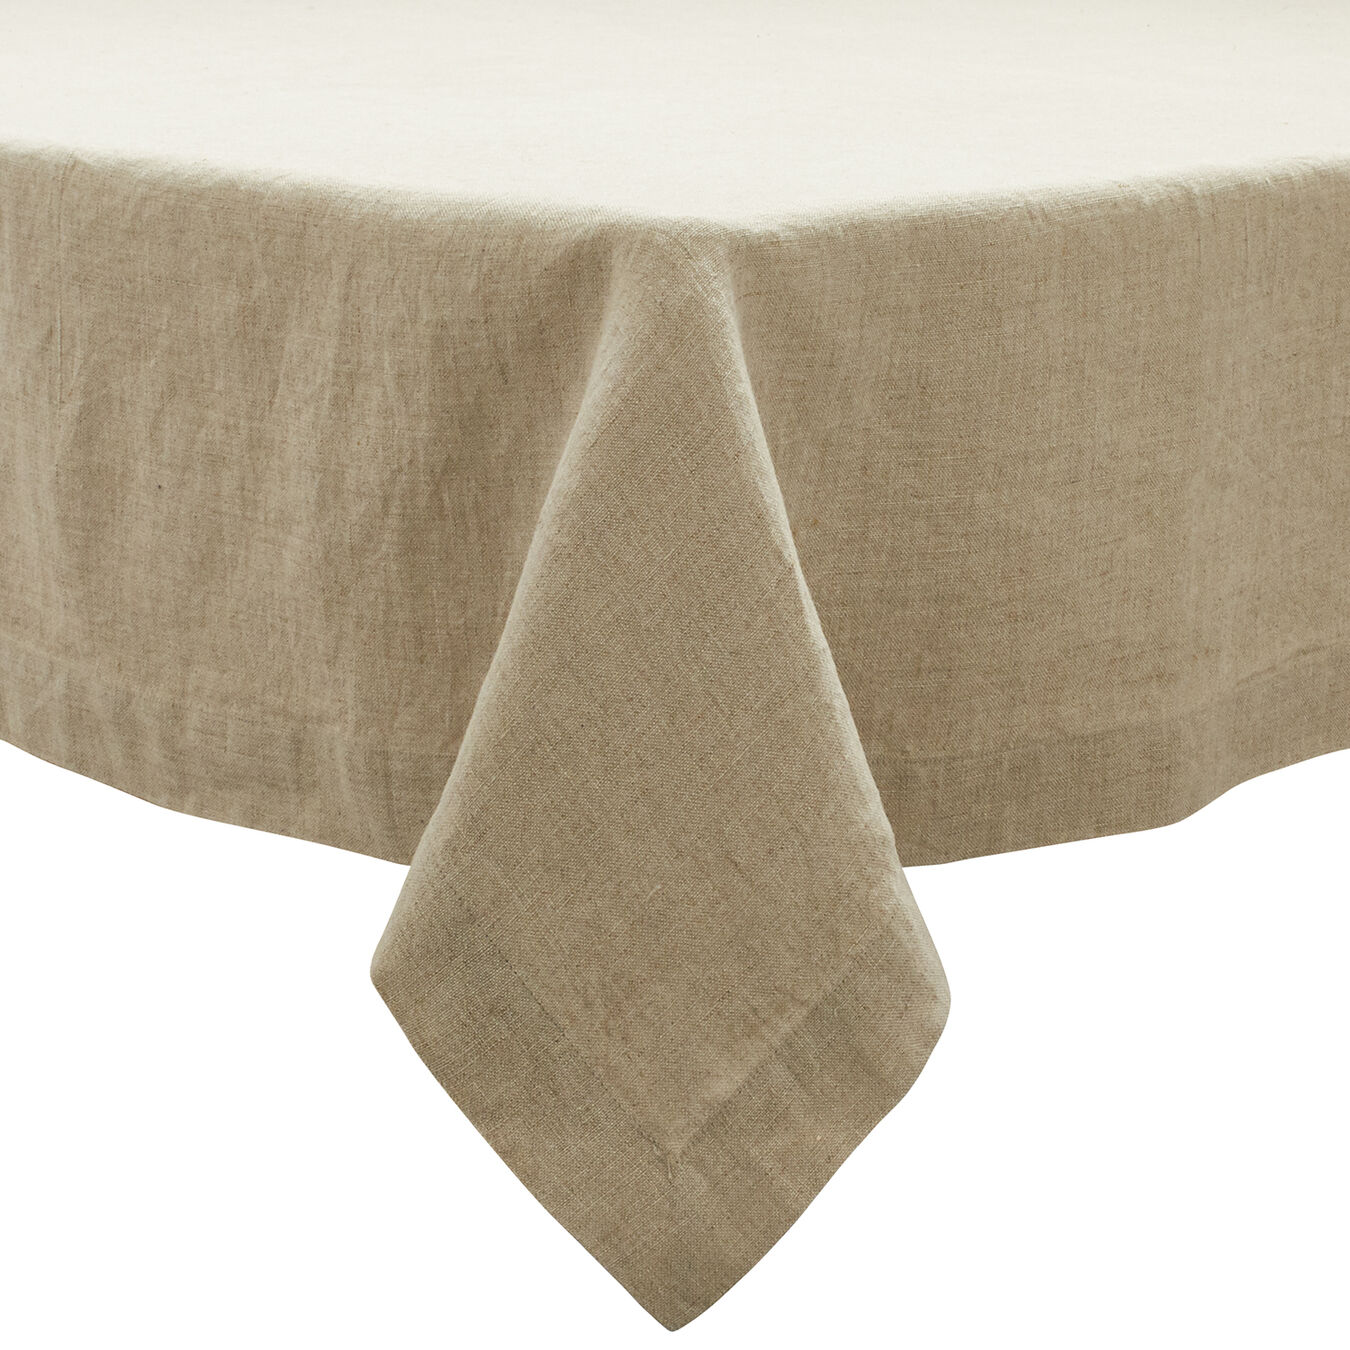 100% Pure Linen White Tablecloth for Indoor and Outdoor use Solino Home Hemstitch Linen Tablecloth 60 x 108 Inch 